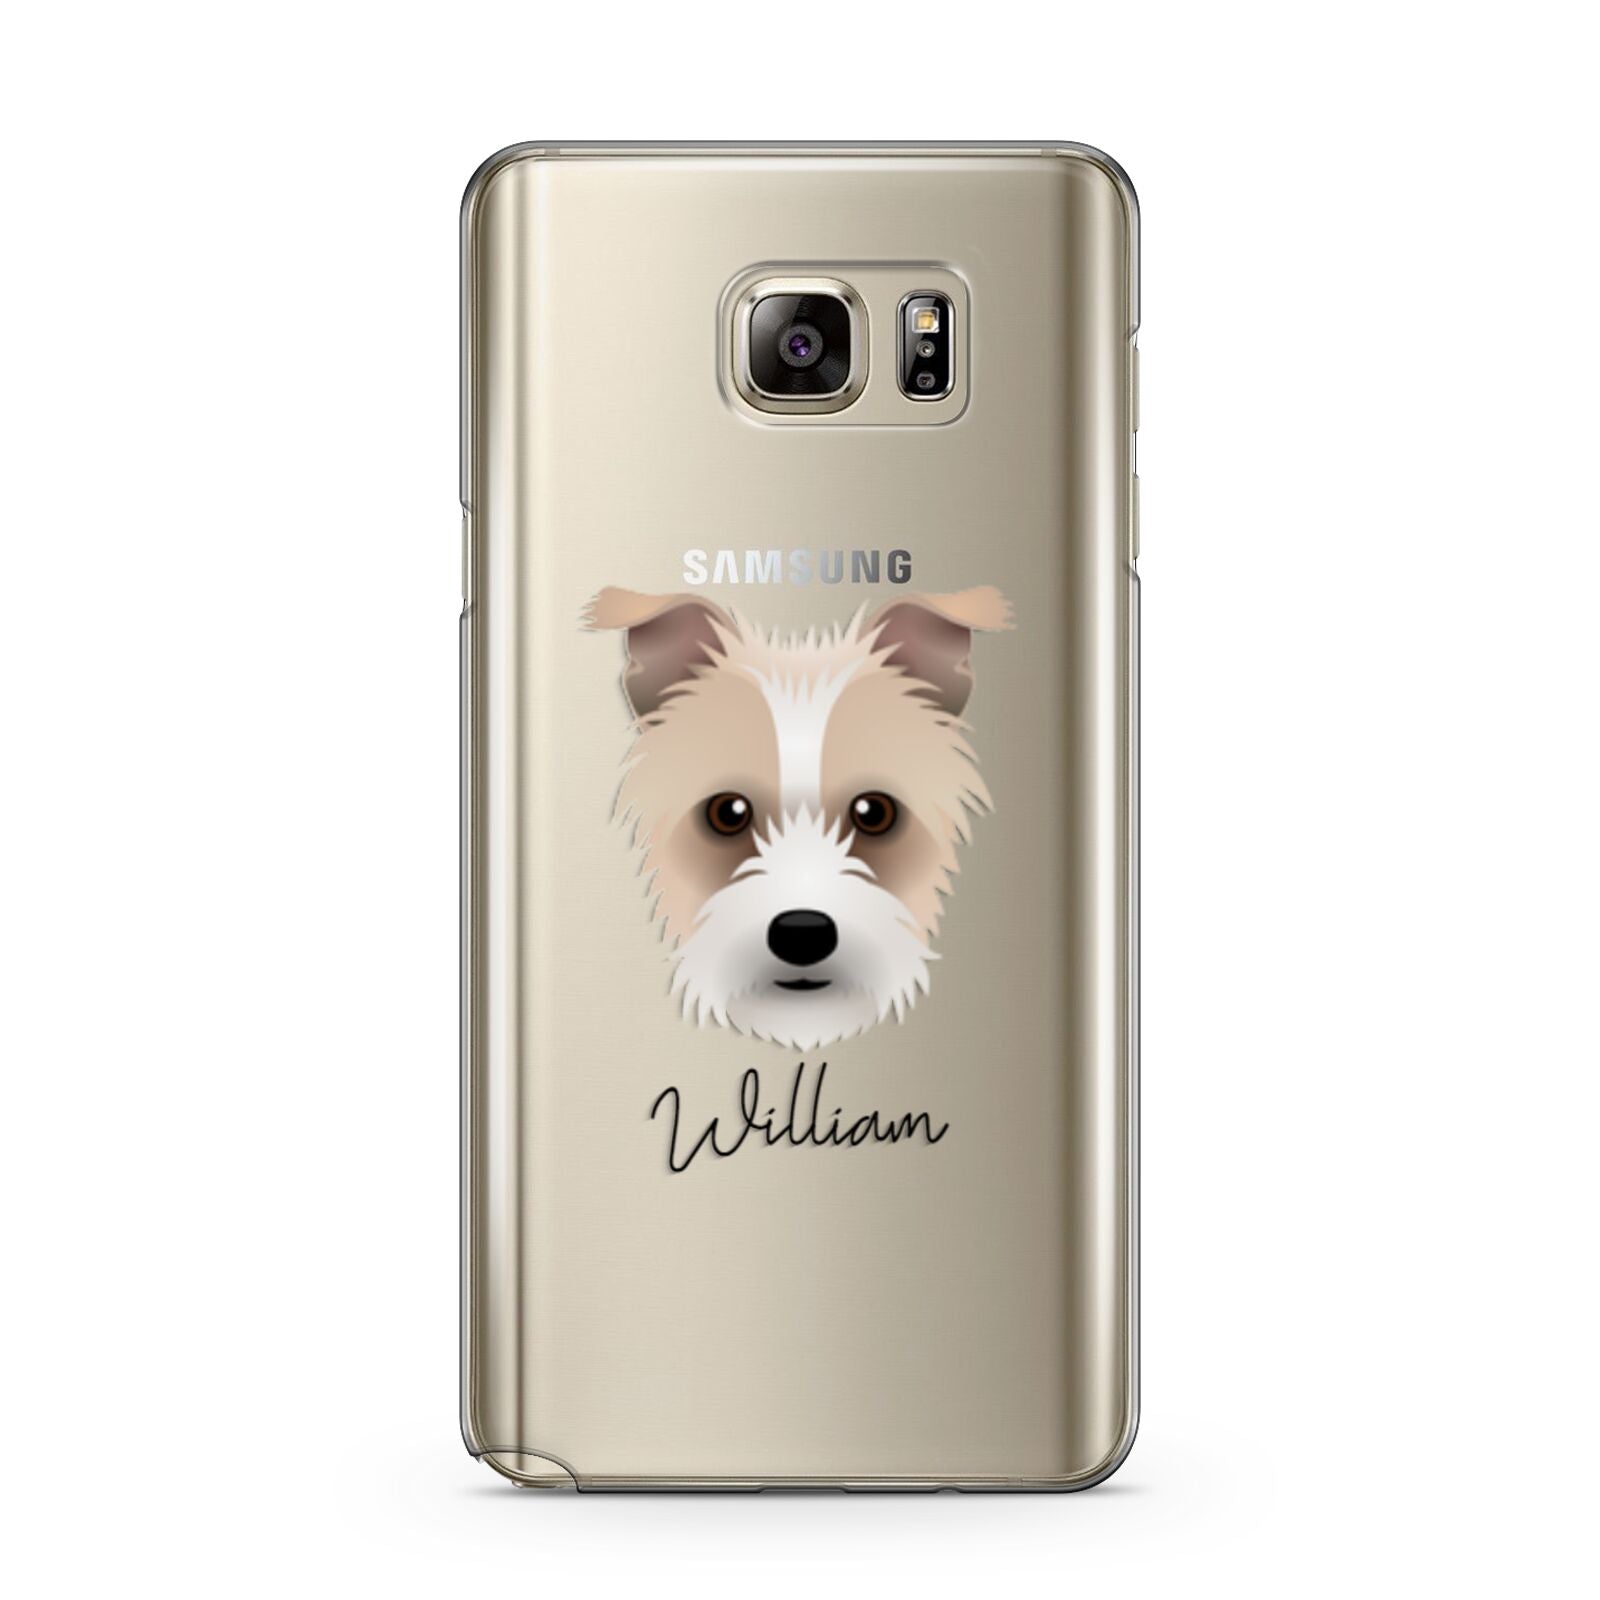 Sporting Lucas Terrier Personalised Samsung Galaxy Note 5 Case